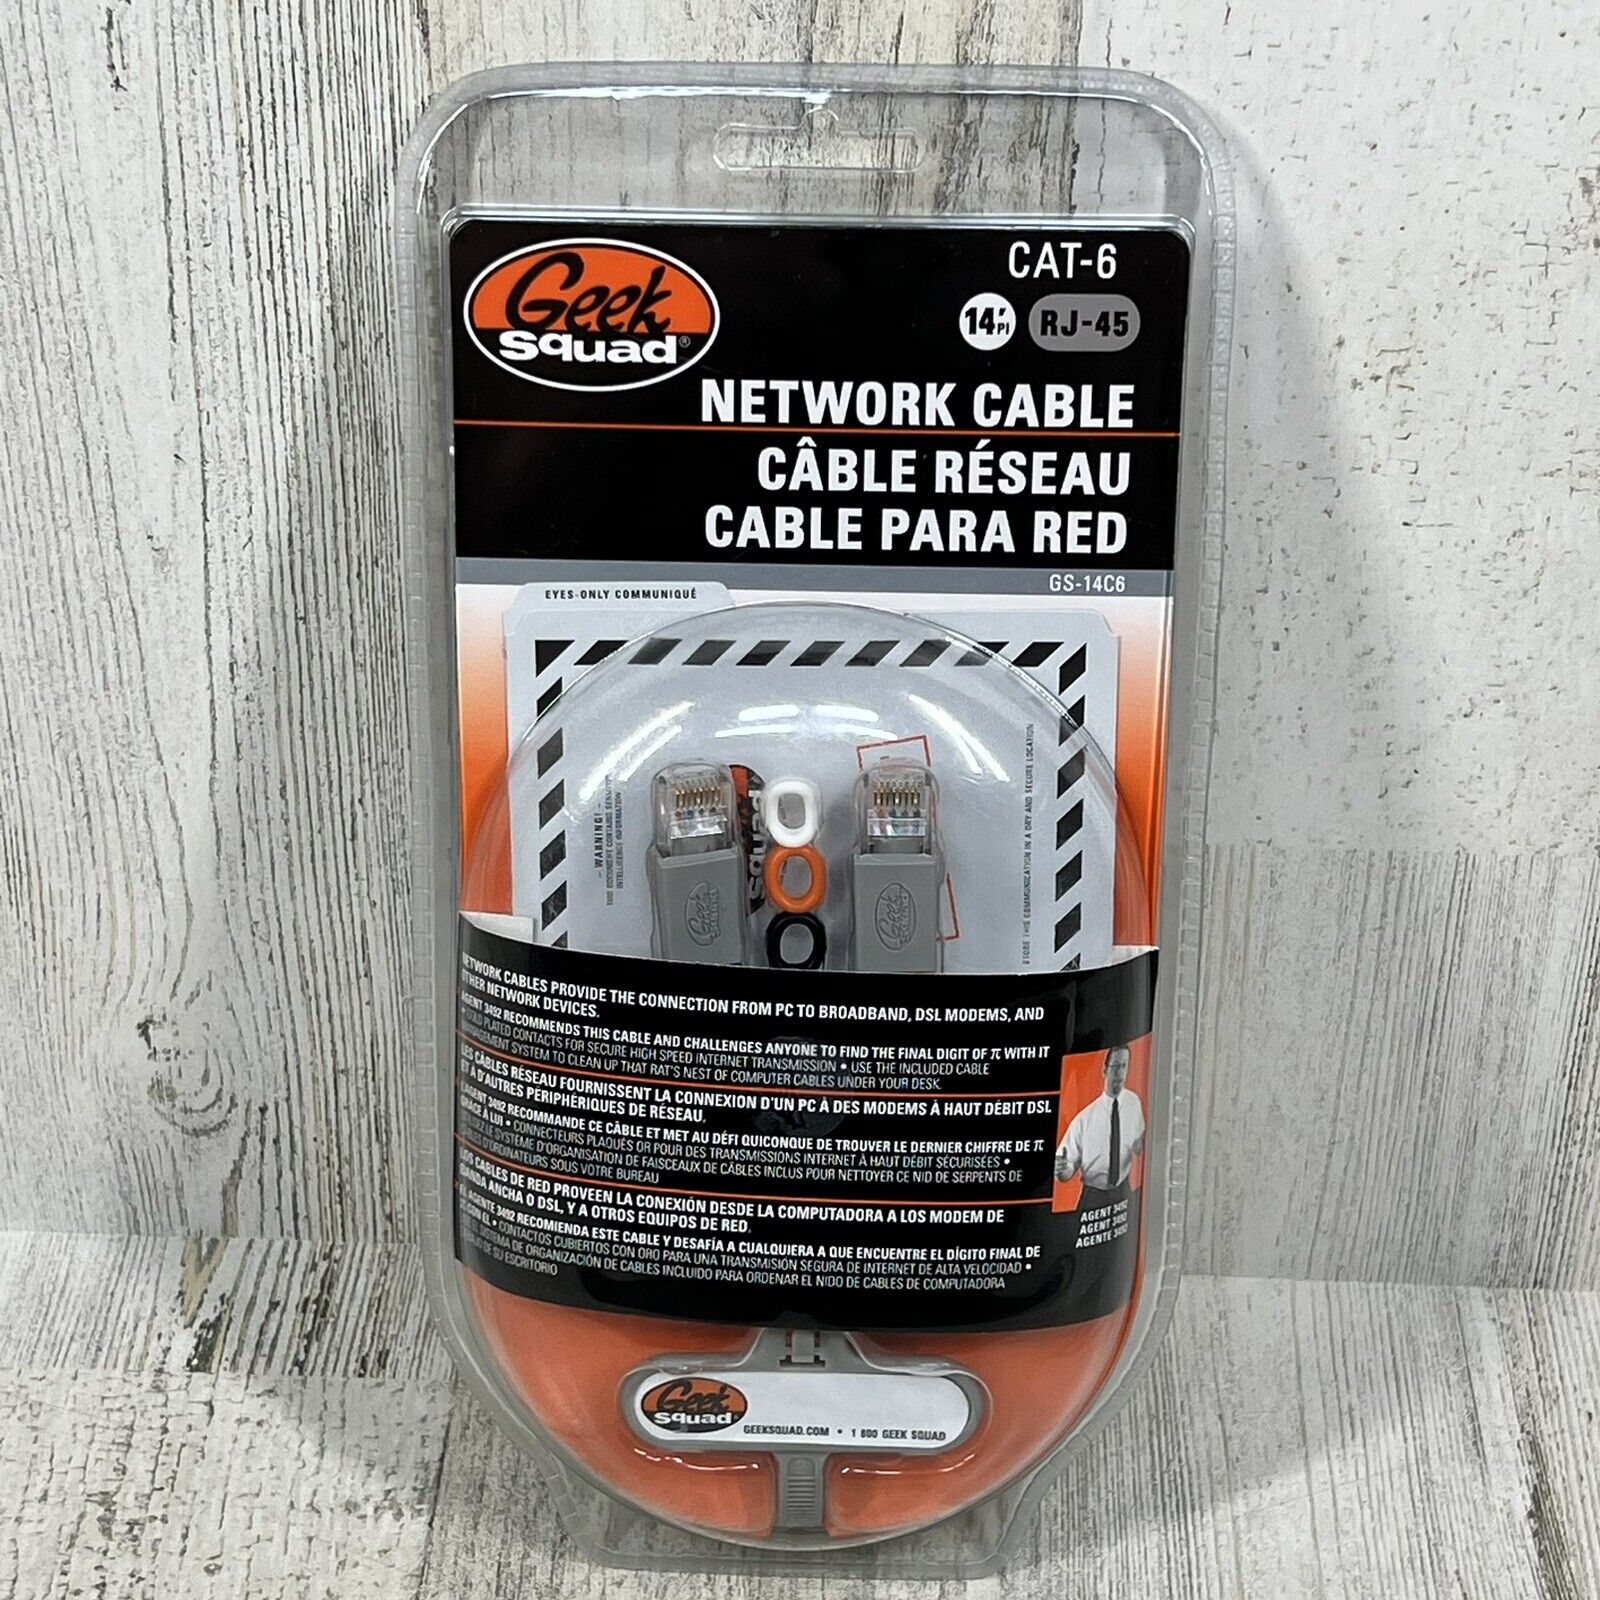 Geek Squad 14 Foot CAT-6 RJ-45 Network Cable GS-14C6 - New / Sealed